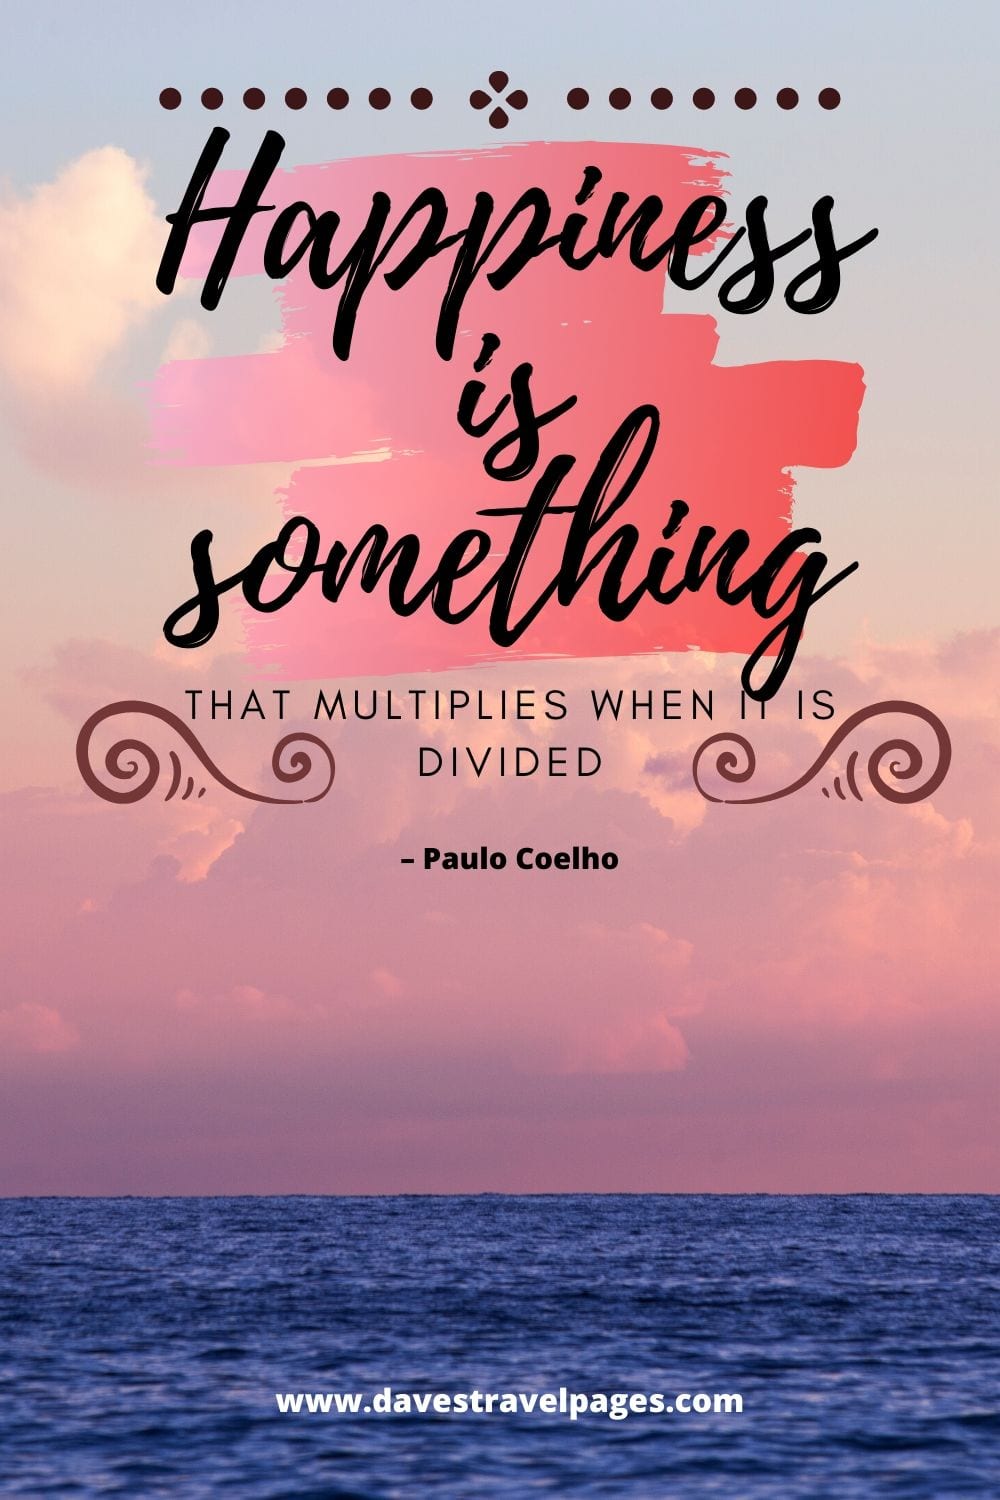 Epic Quote: “Happiness is something that multiplies when it is divided.” – Paulo Coelho